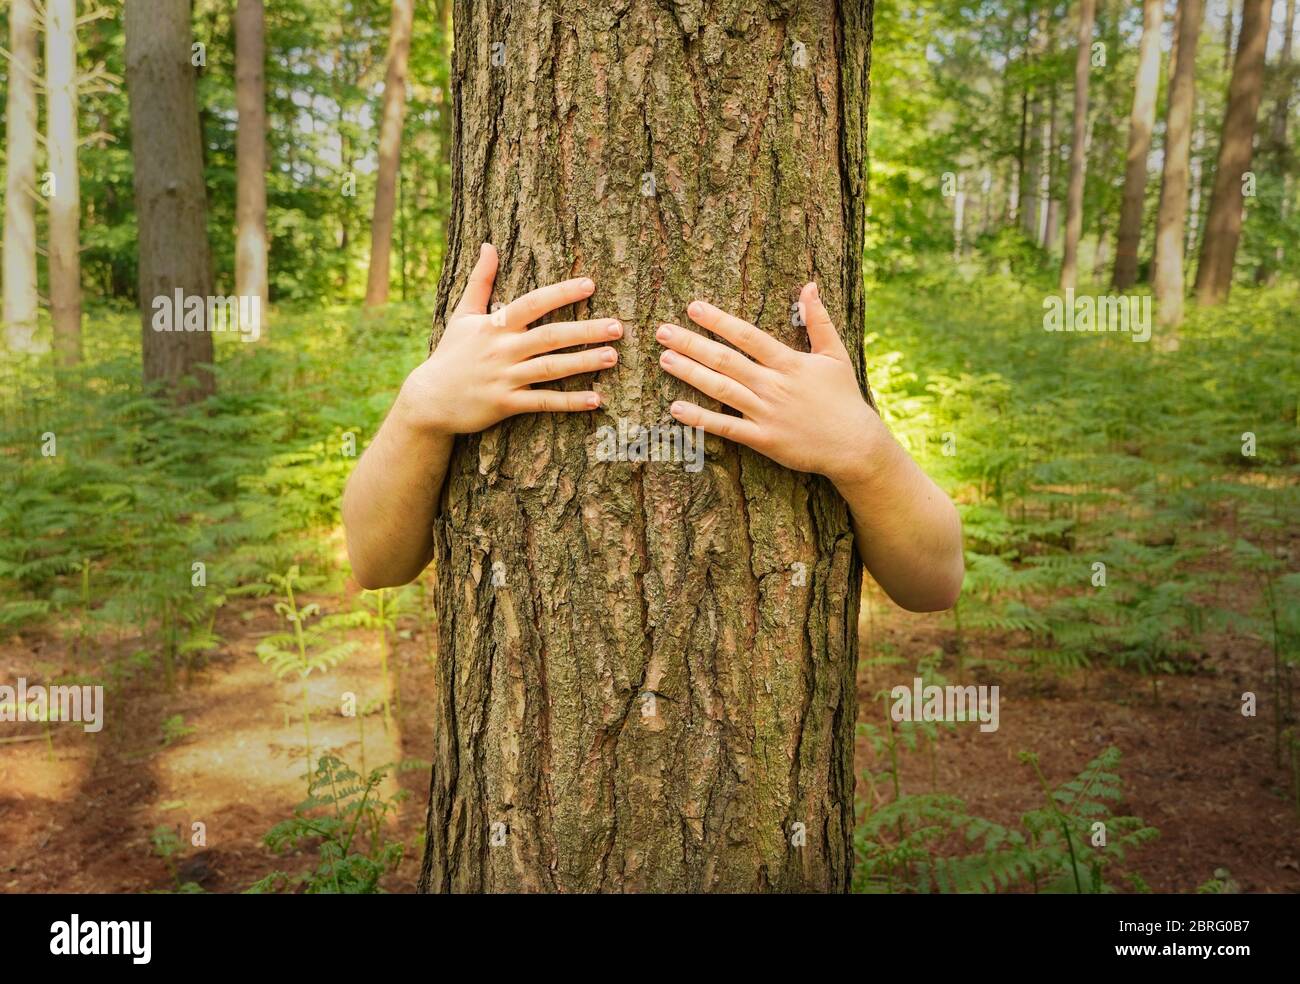 A deforestation environmental image of a protestor hugging a tree trunk to protect it from being felled with copy space. Stock Photo